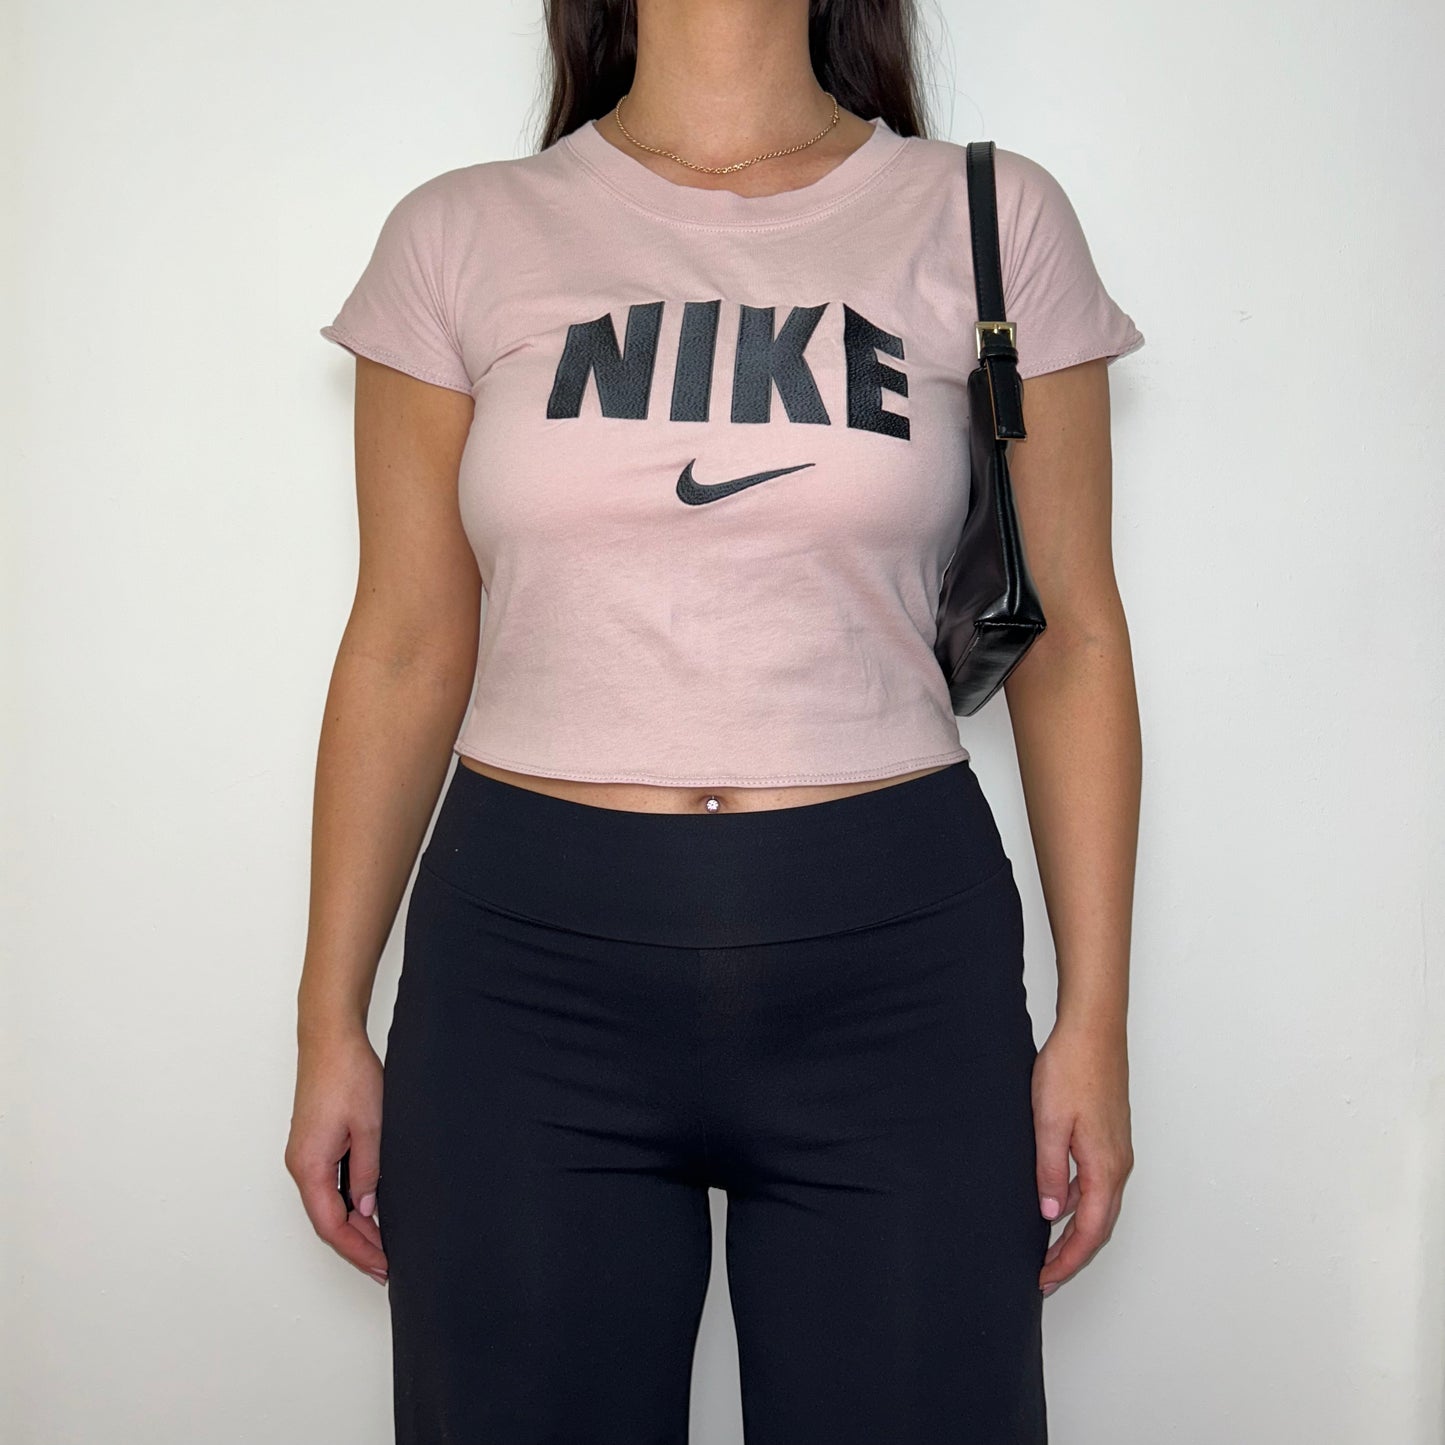 light pink short sleeve crop top with black nike logo shown on a model wearing black trousers and a black shoulder bag